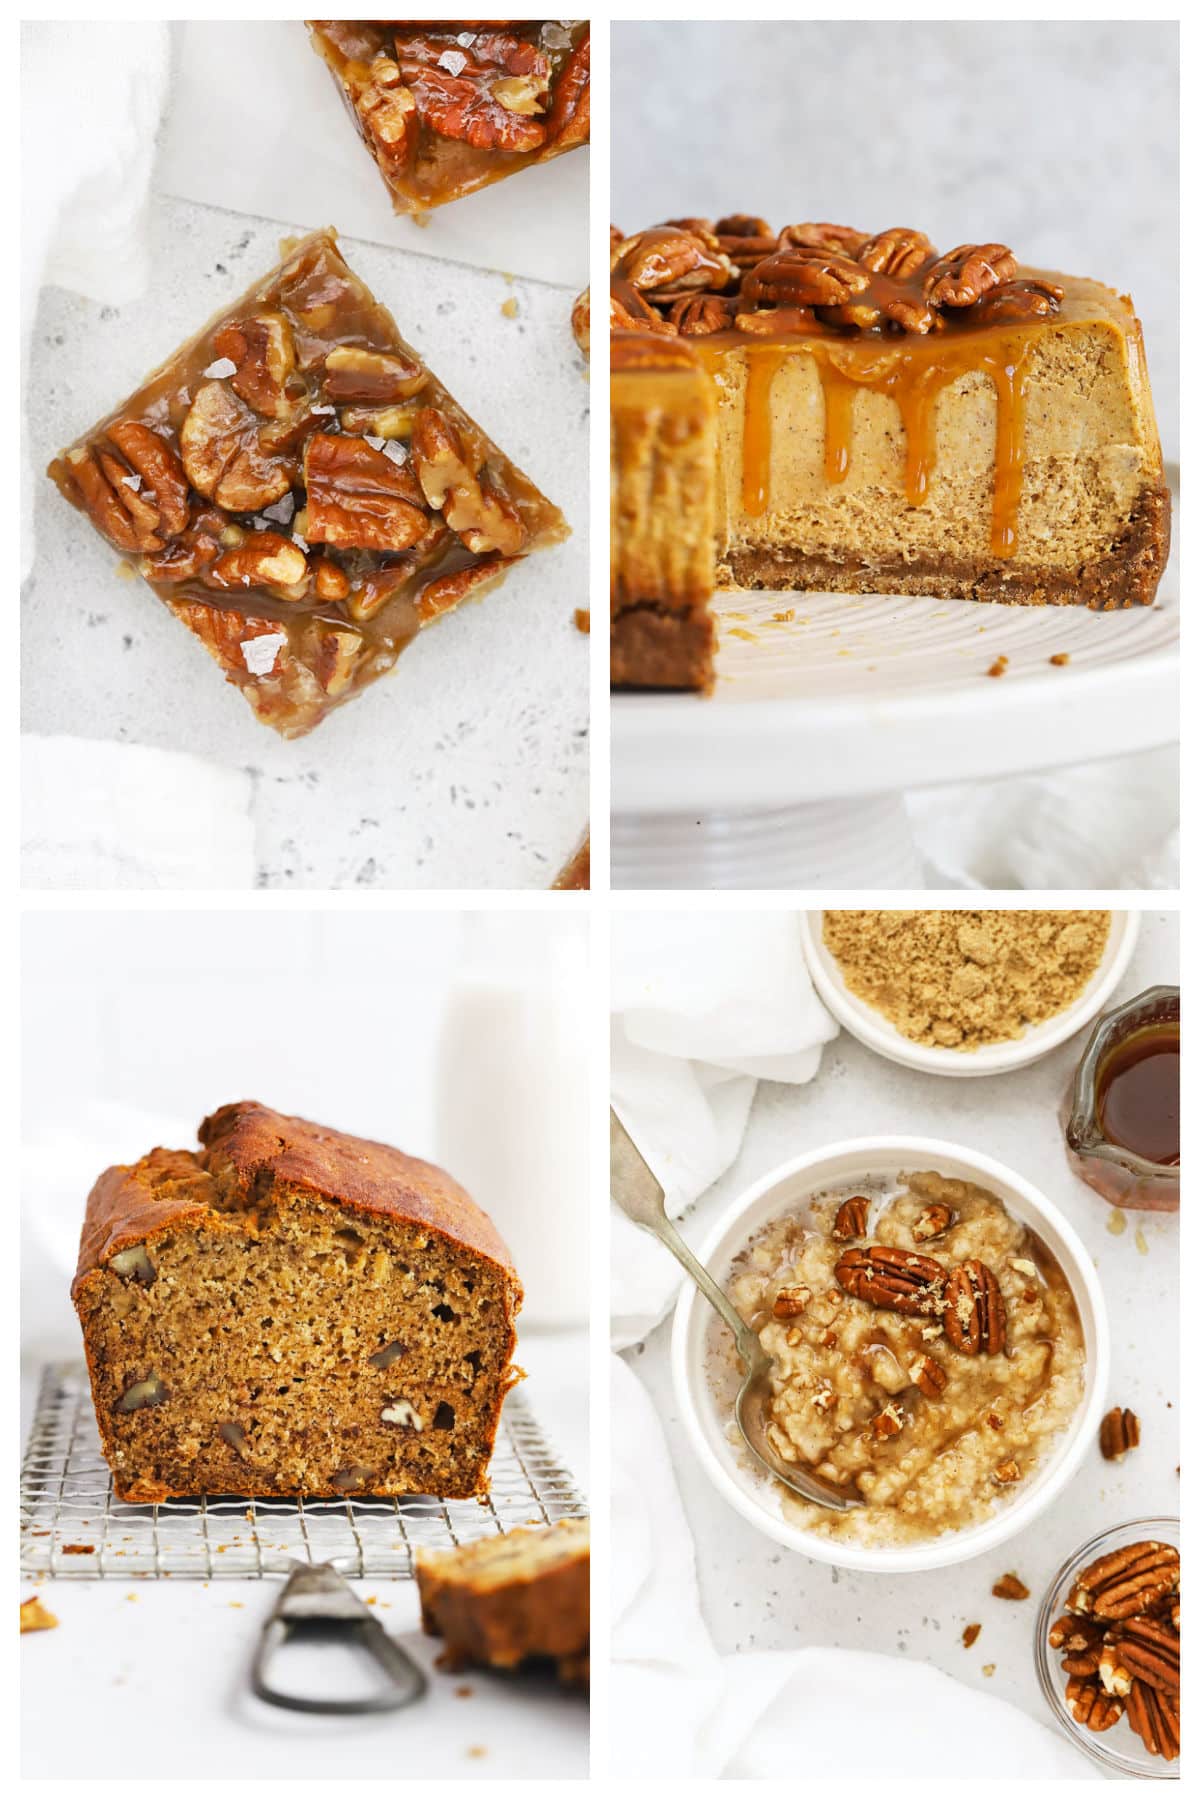 4 recipes that use toasted pecans